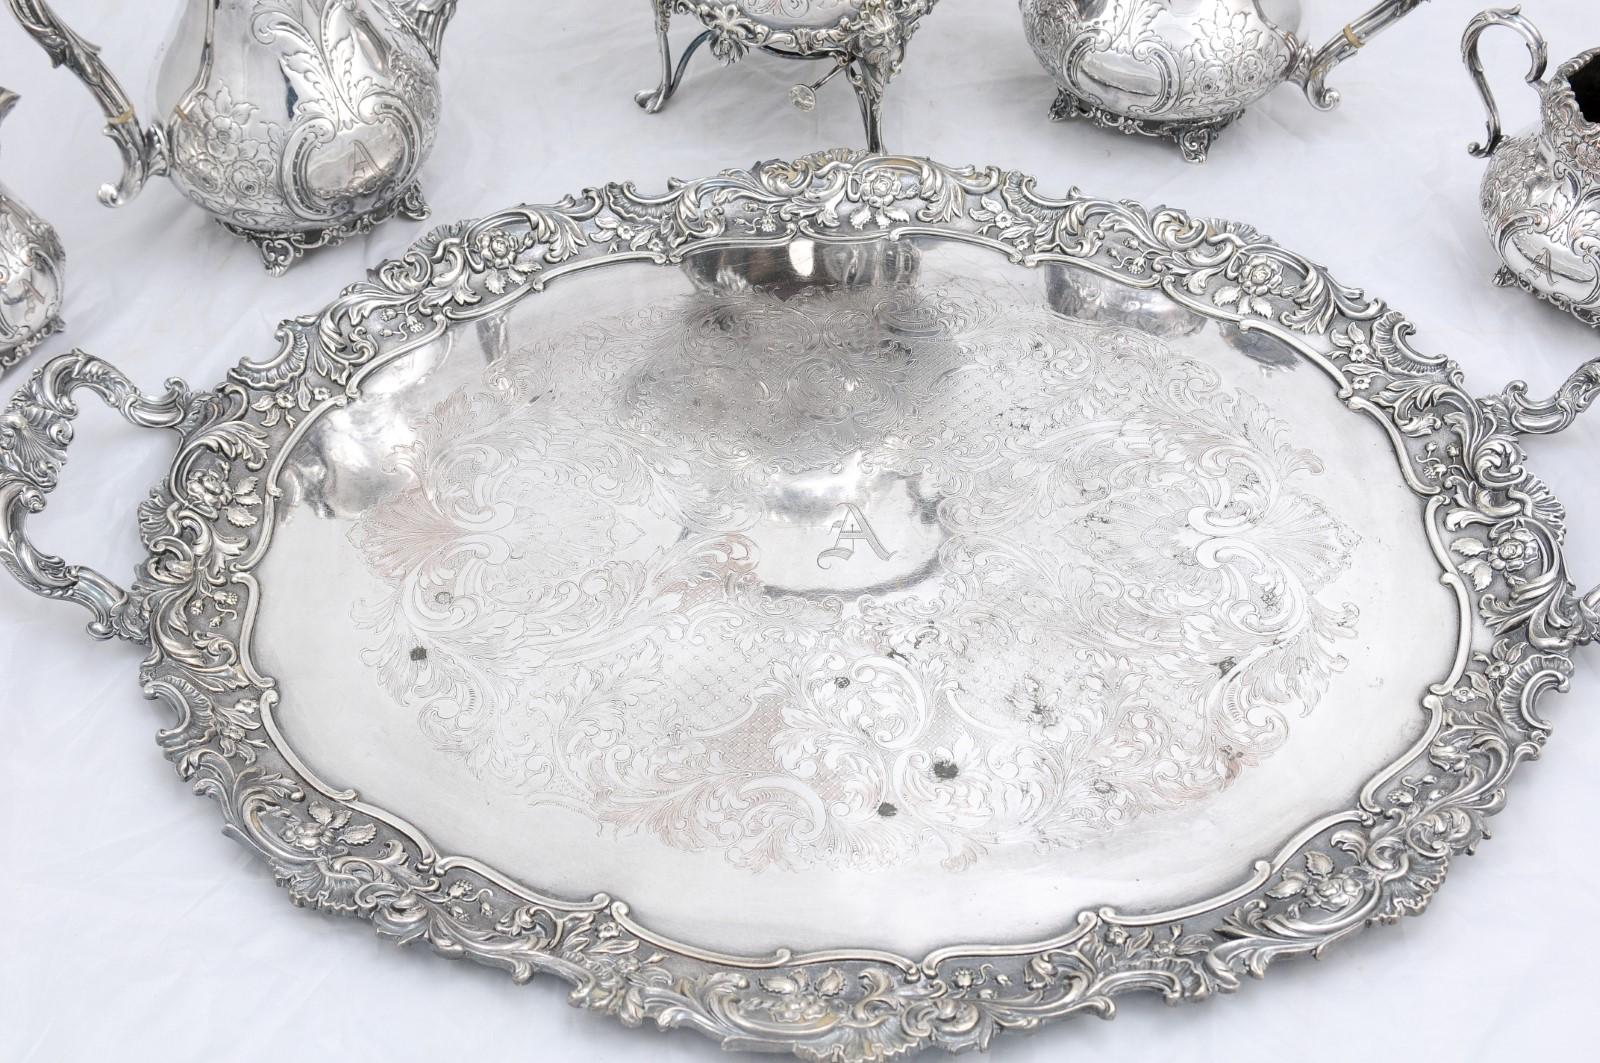 English Victorian Period 19th Century Five-Piece Silver Tea and Coffee Set with Tray